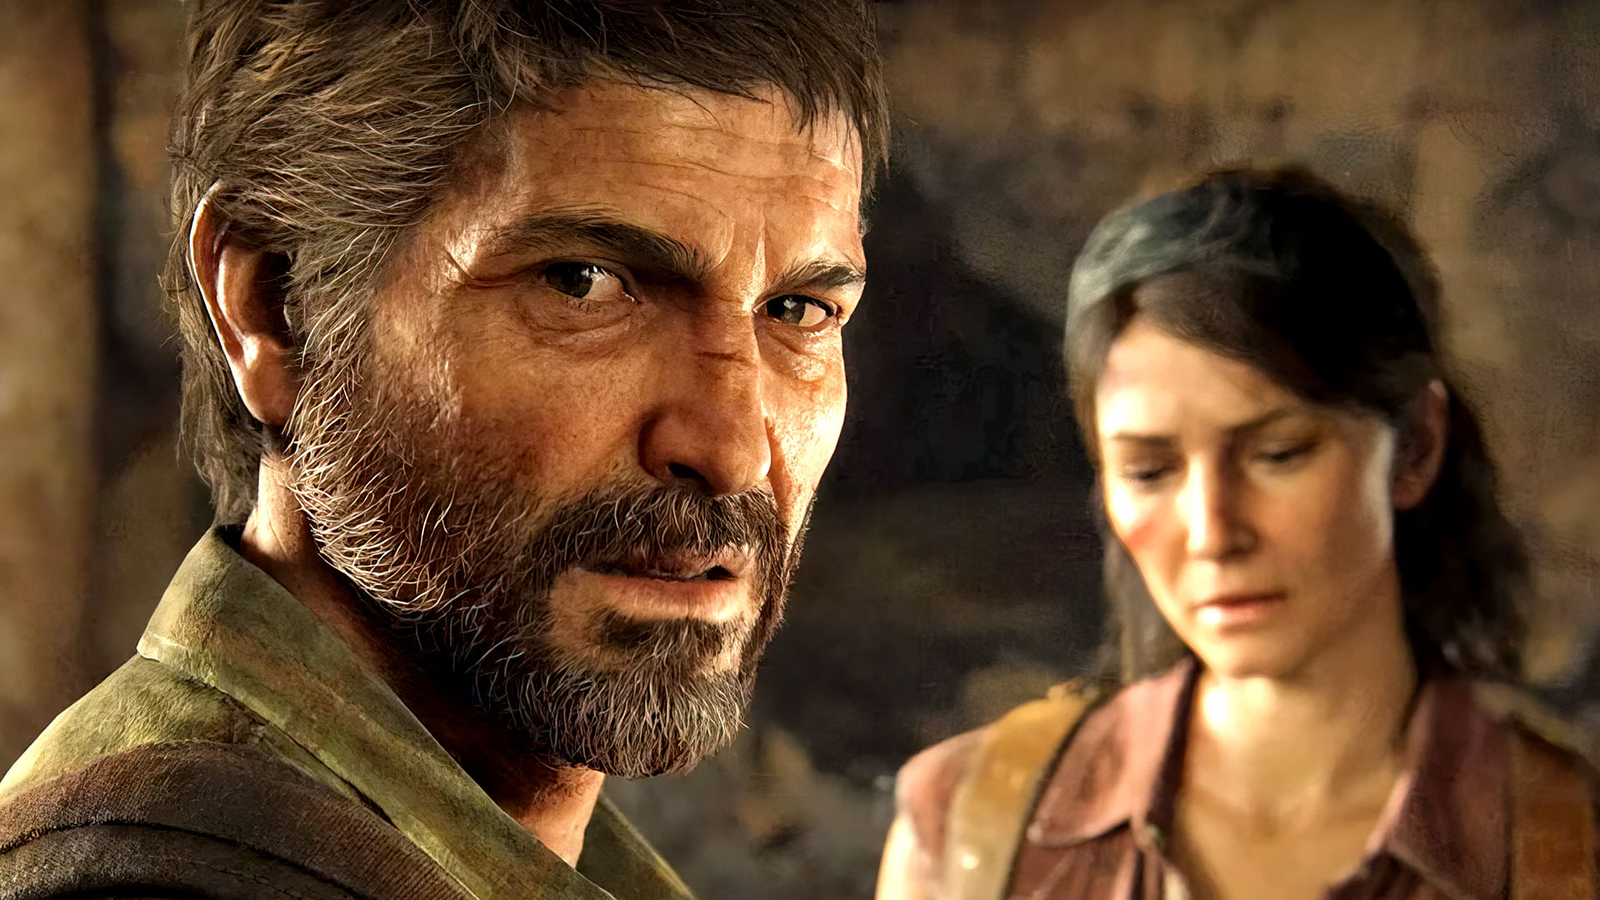 The Last of Us Part 1 is much improved on PC - but big issues